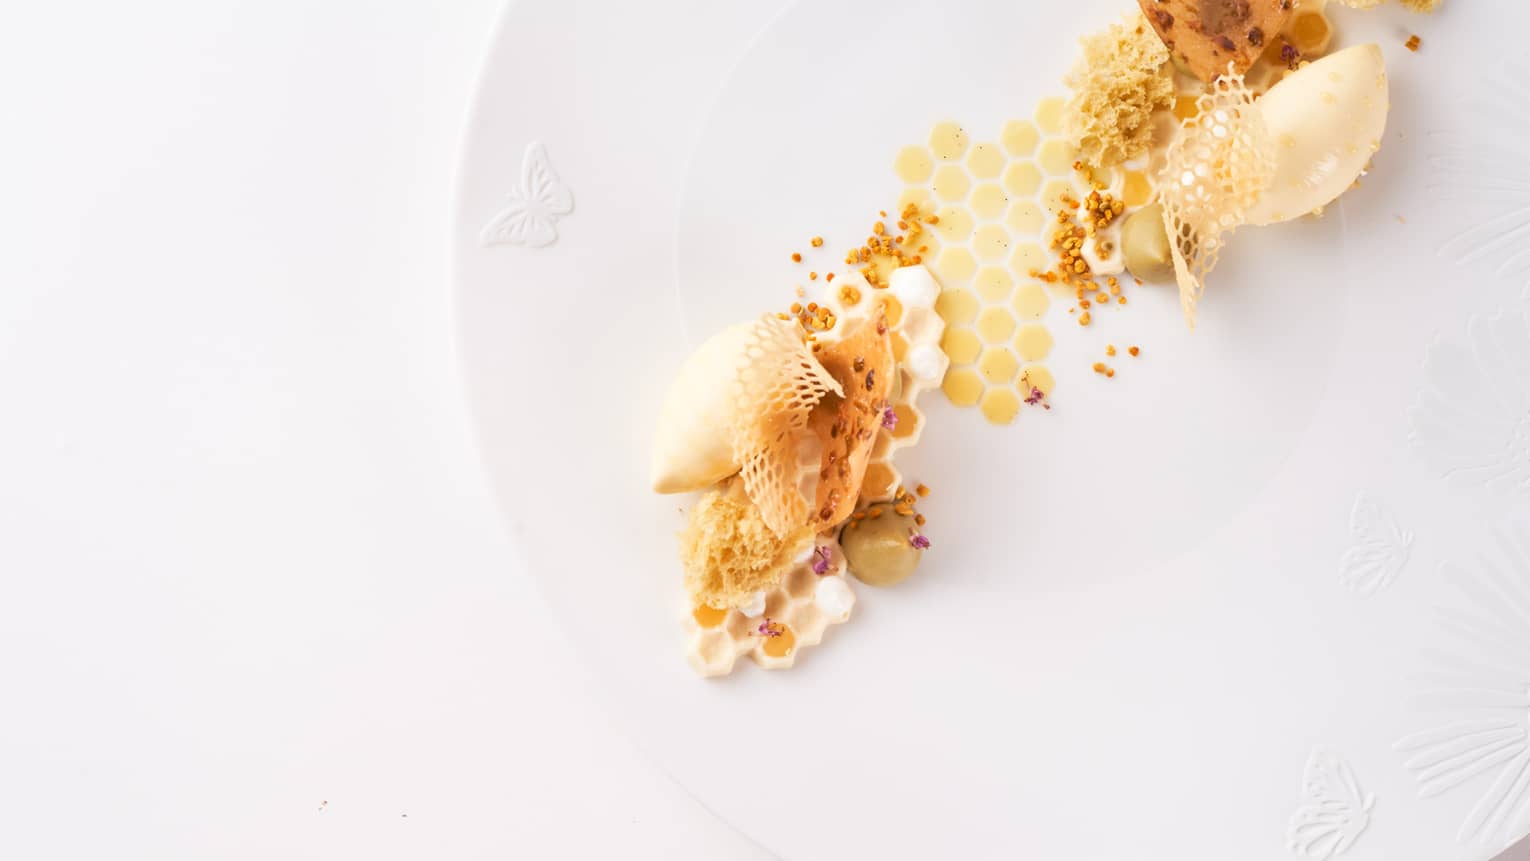 A dessert of honeycomb and chocolate on a white plate.